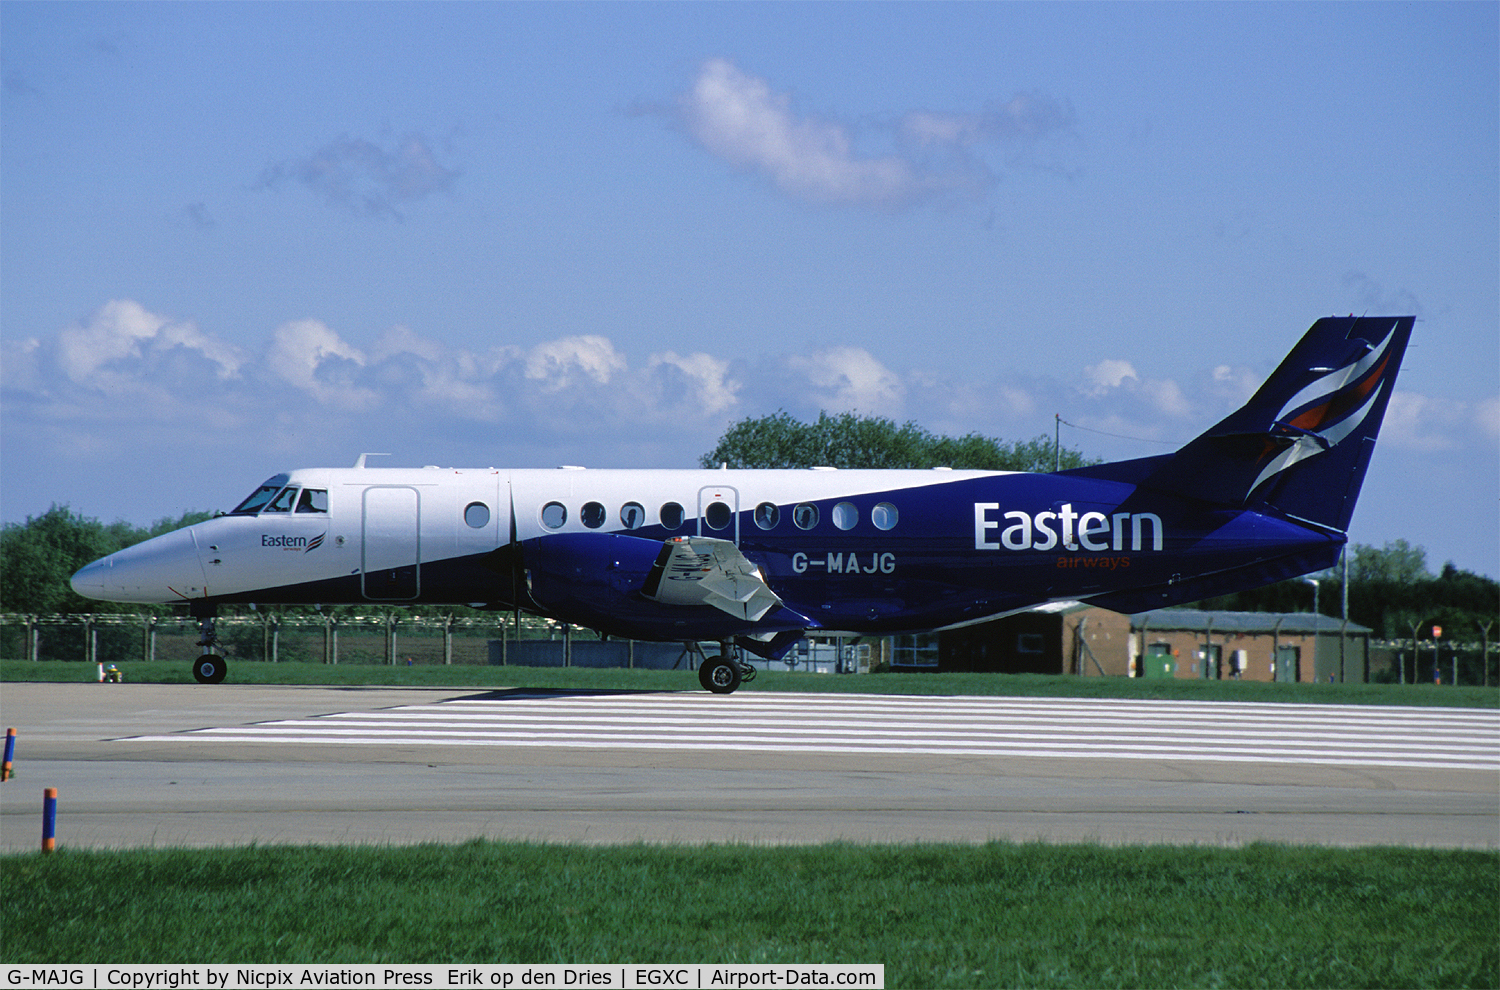 G-MAJG, 1993 British Aerospace Jetstream 41 C/N 41009, G-MAJG was the daily taxi to and from RAF Marham.